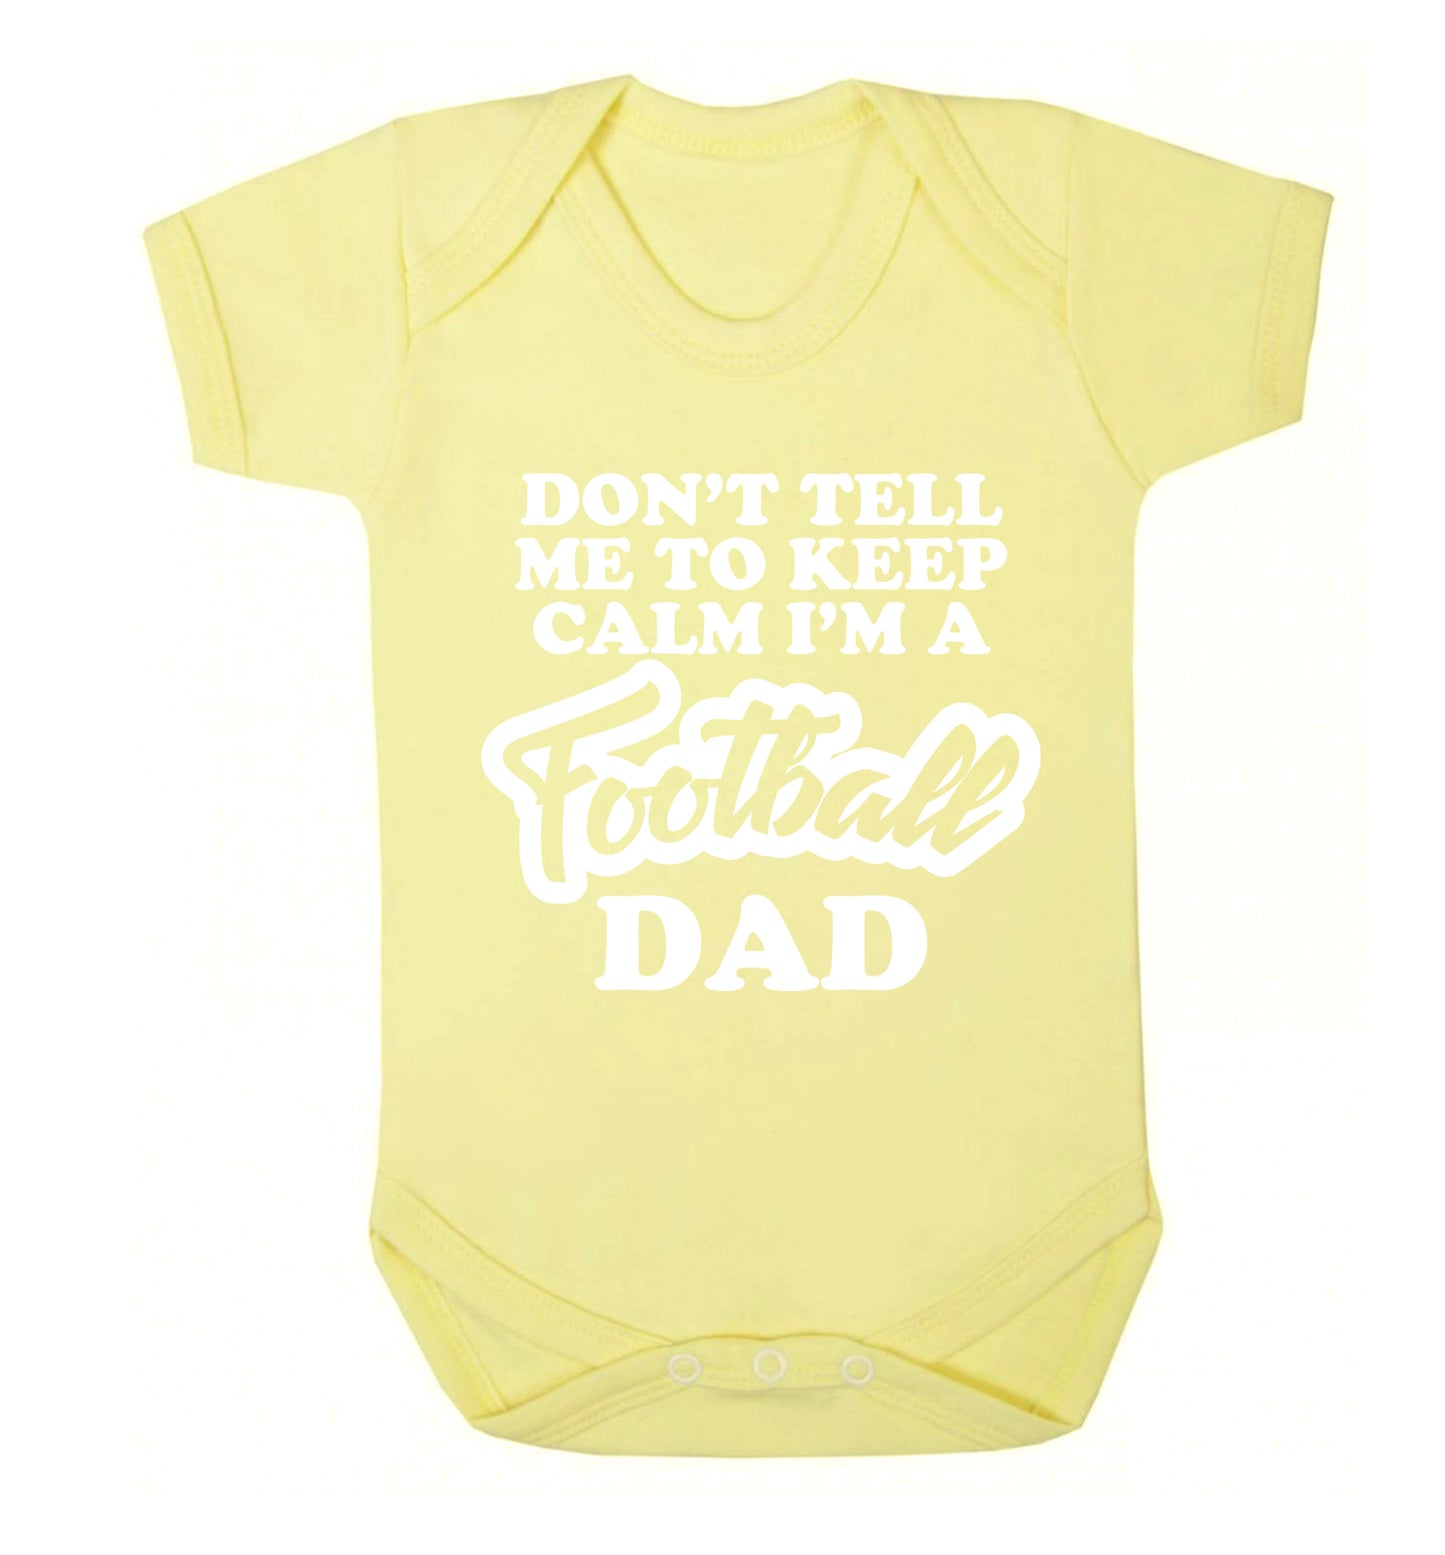 Don't tell me to keep calm I'm a football grandad Baby Vest pale yellow 18-24 months